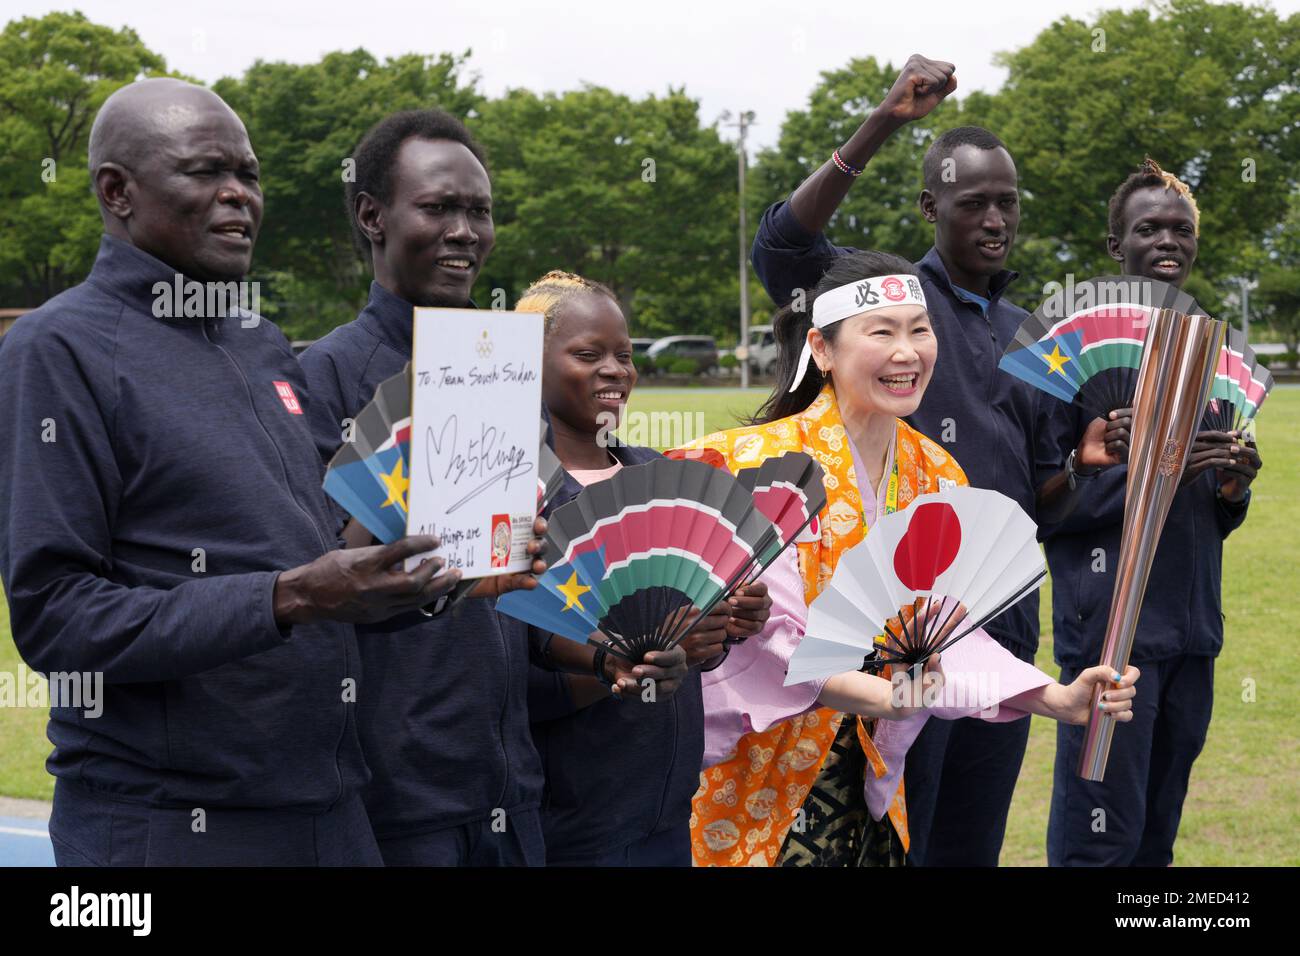 Olympic fan Kyoko Ishikawa, center, takes a photo with South Sudan athletes who have been train for the Tokyo 2020 Olympics and Paralympics in Maebashi, Gunma Prefecture, north of Tokyo Thursday, June 3, 2021. Ishikawa, who carried the Olympic torch in Toyama Prefecture a day before, came to cheer on the South Sudanese team as an unofficial "International Olympic Cheerleader" marking the 50 day countdown to the Olympics start. (AP Photo/Eugene Hoshiko) Stock Photo